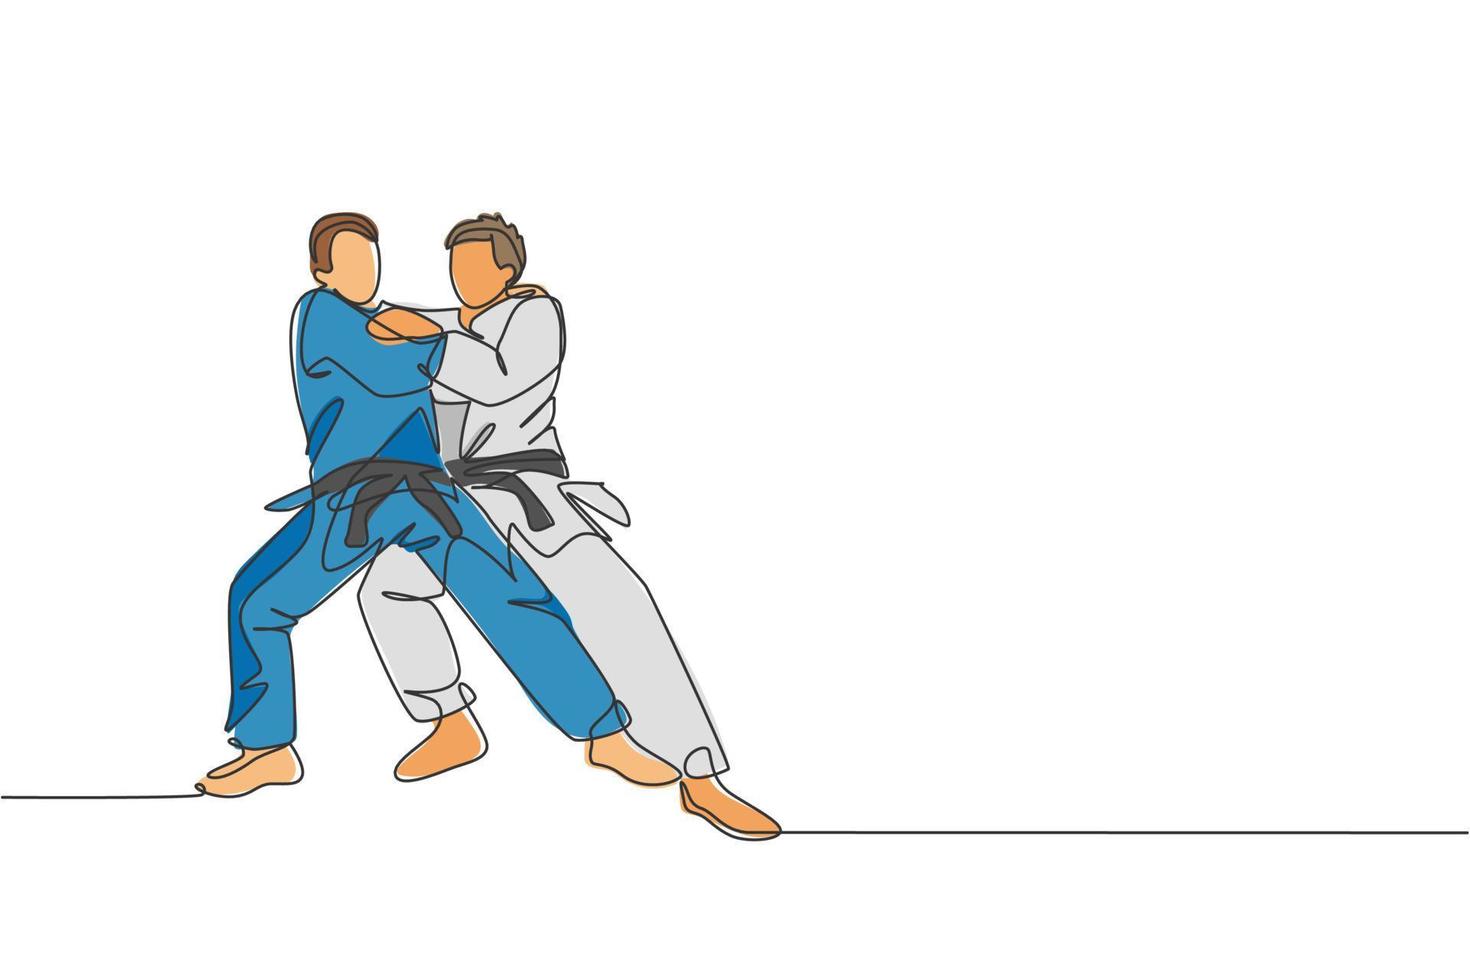 One continuous line drawing of two young sporty men training judo technique at sport hall. Jiu jitsu battle fight sport competition concept. Dynamic single line draw design graphic vector illustration